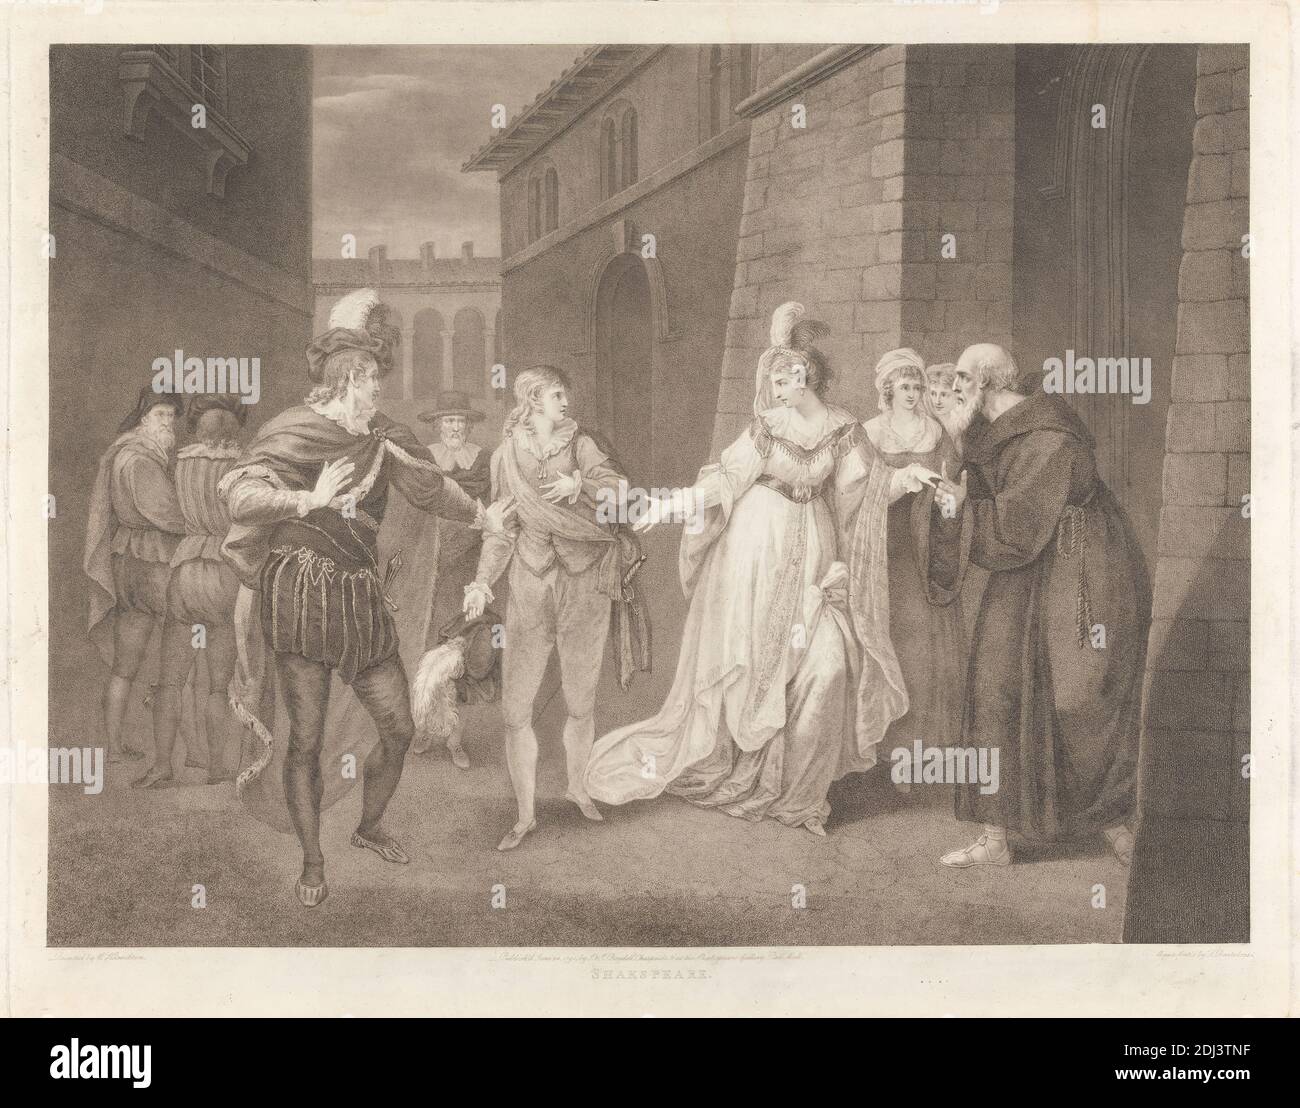 Twelfth Night, Act V, Scene I: The Street, Print made by Francesco Bartolozzi RA, 1728–1815, Italian, active in Britain (1764–99), after William Hamilton, 1751–1801, British, 1803, Engraving on medium, smooth, cream wove paper, Sheet: 20 x 29 1/2 inches (50.8 x 74.9 cm), Plate: 19 3/4 x 24 7/8 inches (50.2 x 63.2 cm), and Image: 17 5/16 x 23 3/8 inches (44 x 59.4 cm), arcade, arches, blocks, breeches, buildings, capes, caps, chain, chimneys, collars, columns, cord, doublets, dresses, earring, fur, habit, hat, headband, kerchief, literary theme, men, play, plumes, sandals, sashes (costume Stock Photo